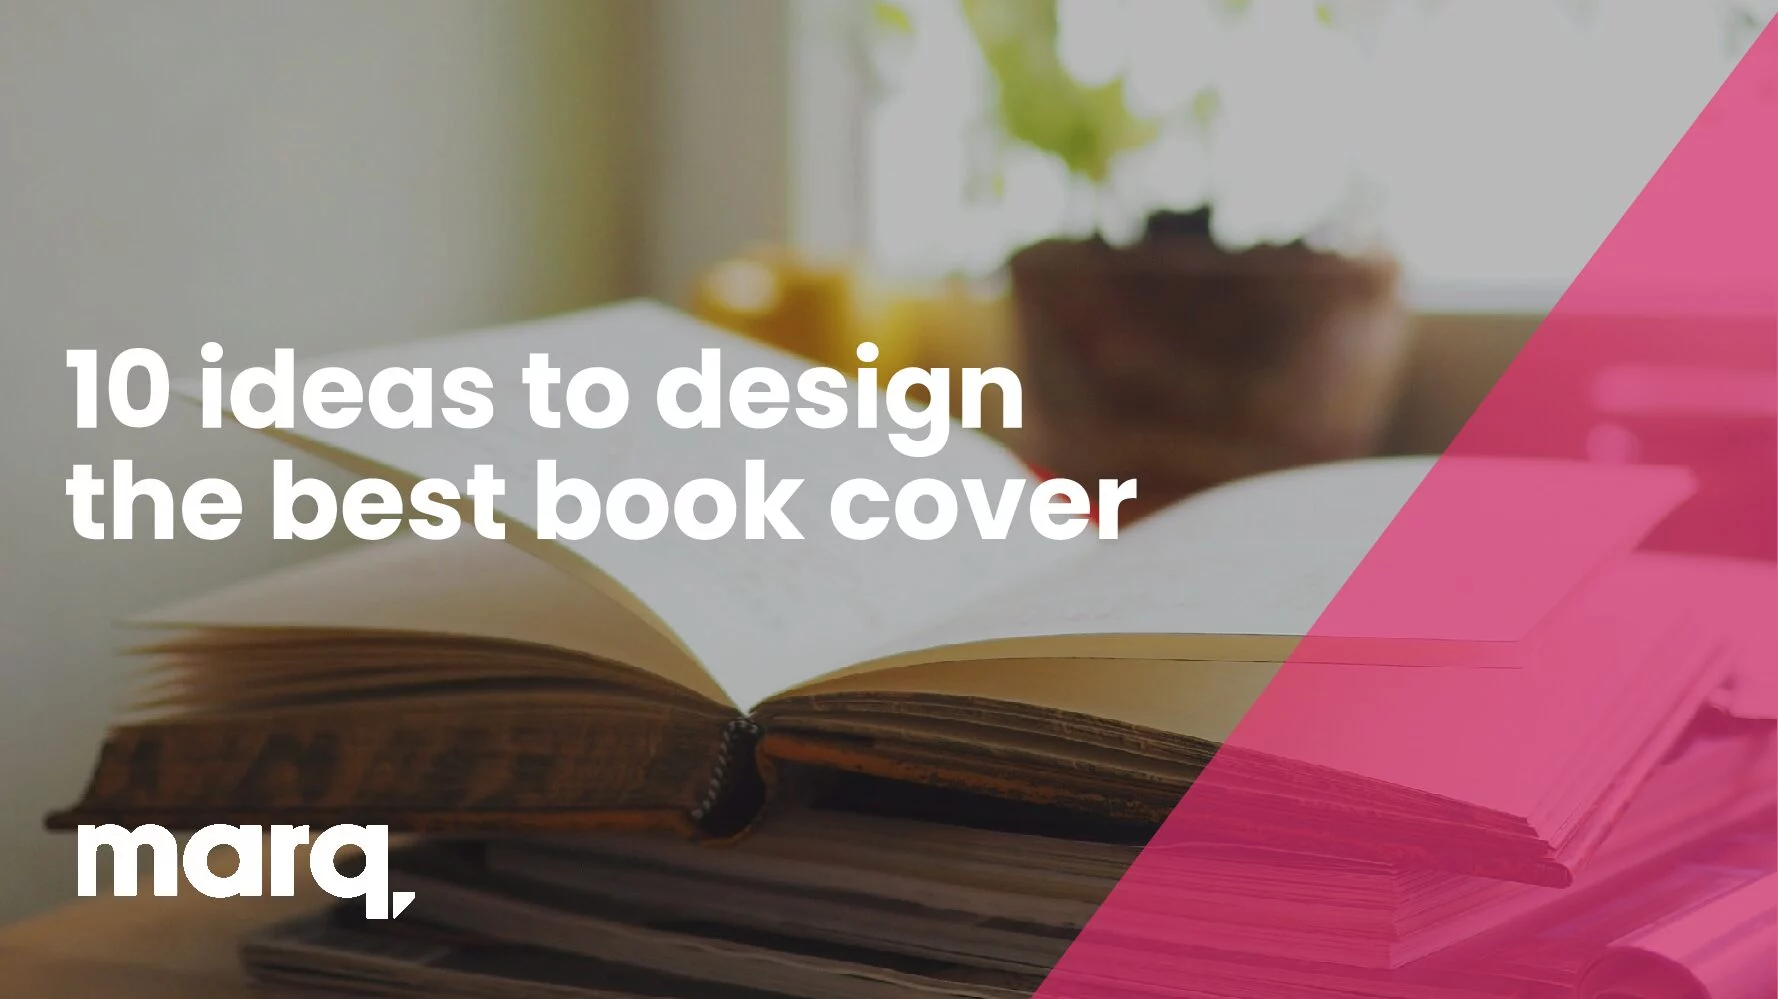 10 ideas to design the best book cover